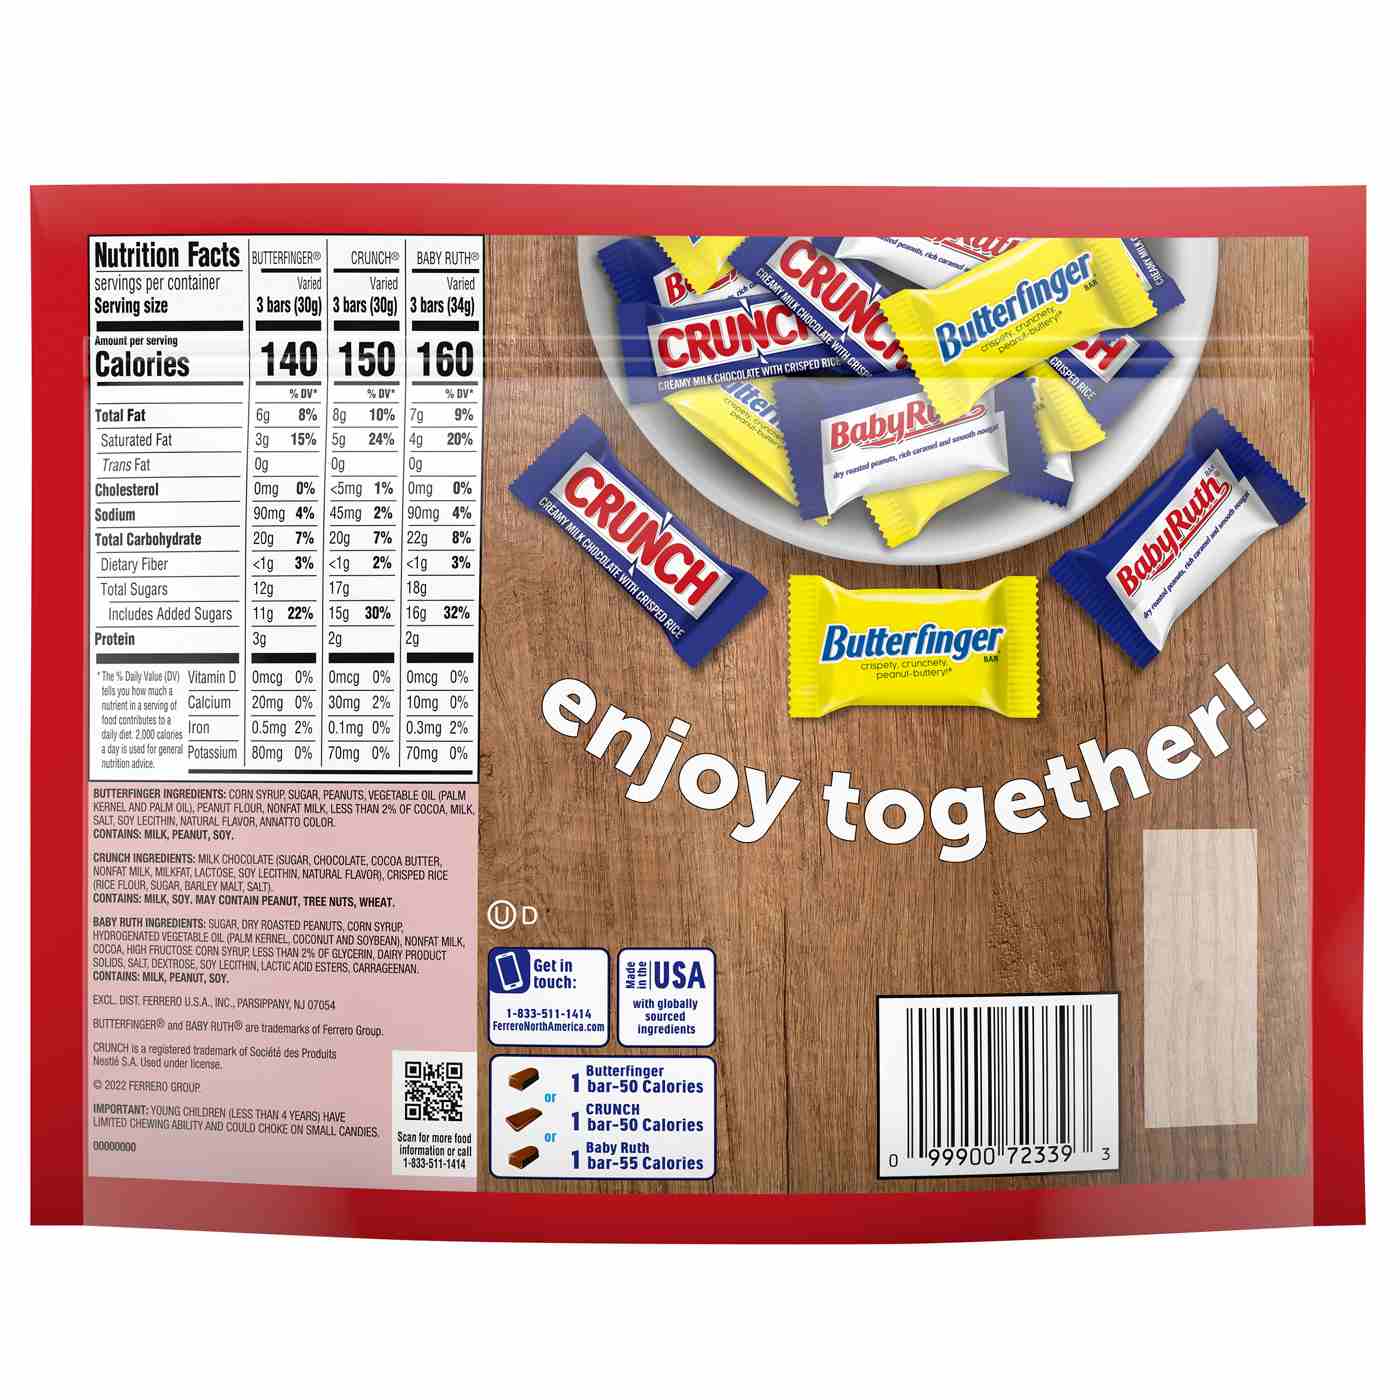 Butterfinger, Baby Ruth & Crunch Minis Assorted Chocolate Candy Bars - Share Pack; image 2 of 2